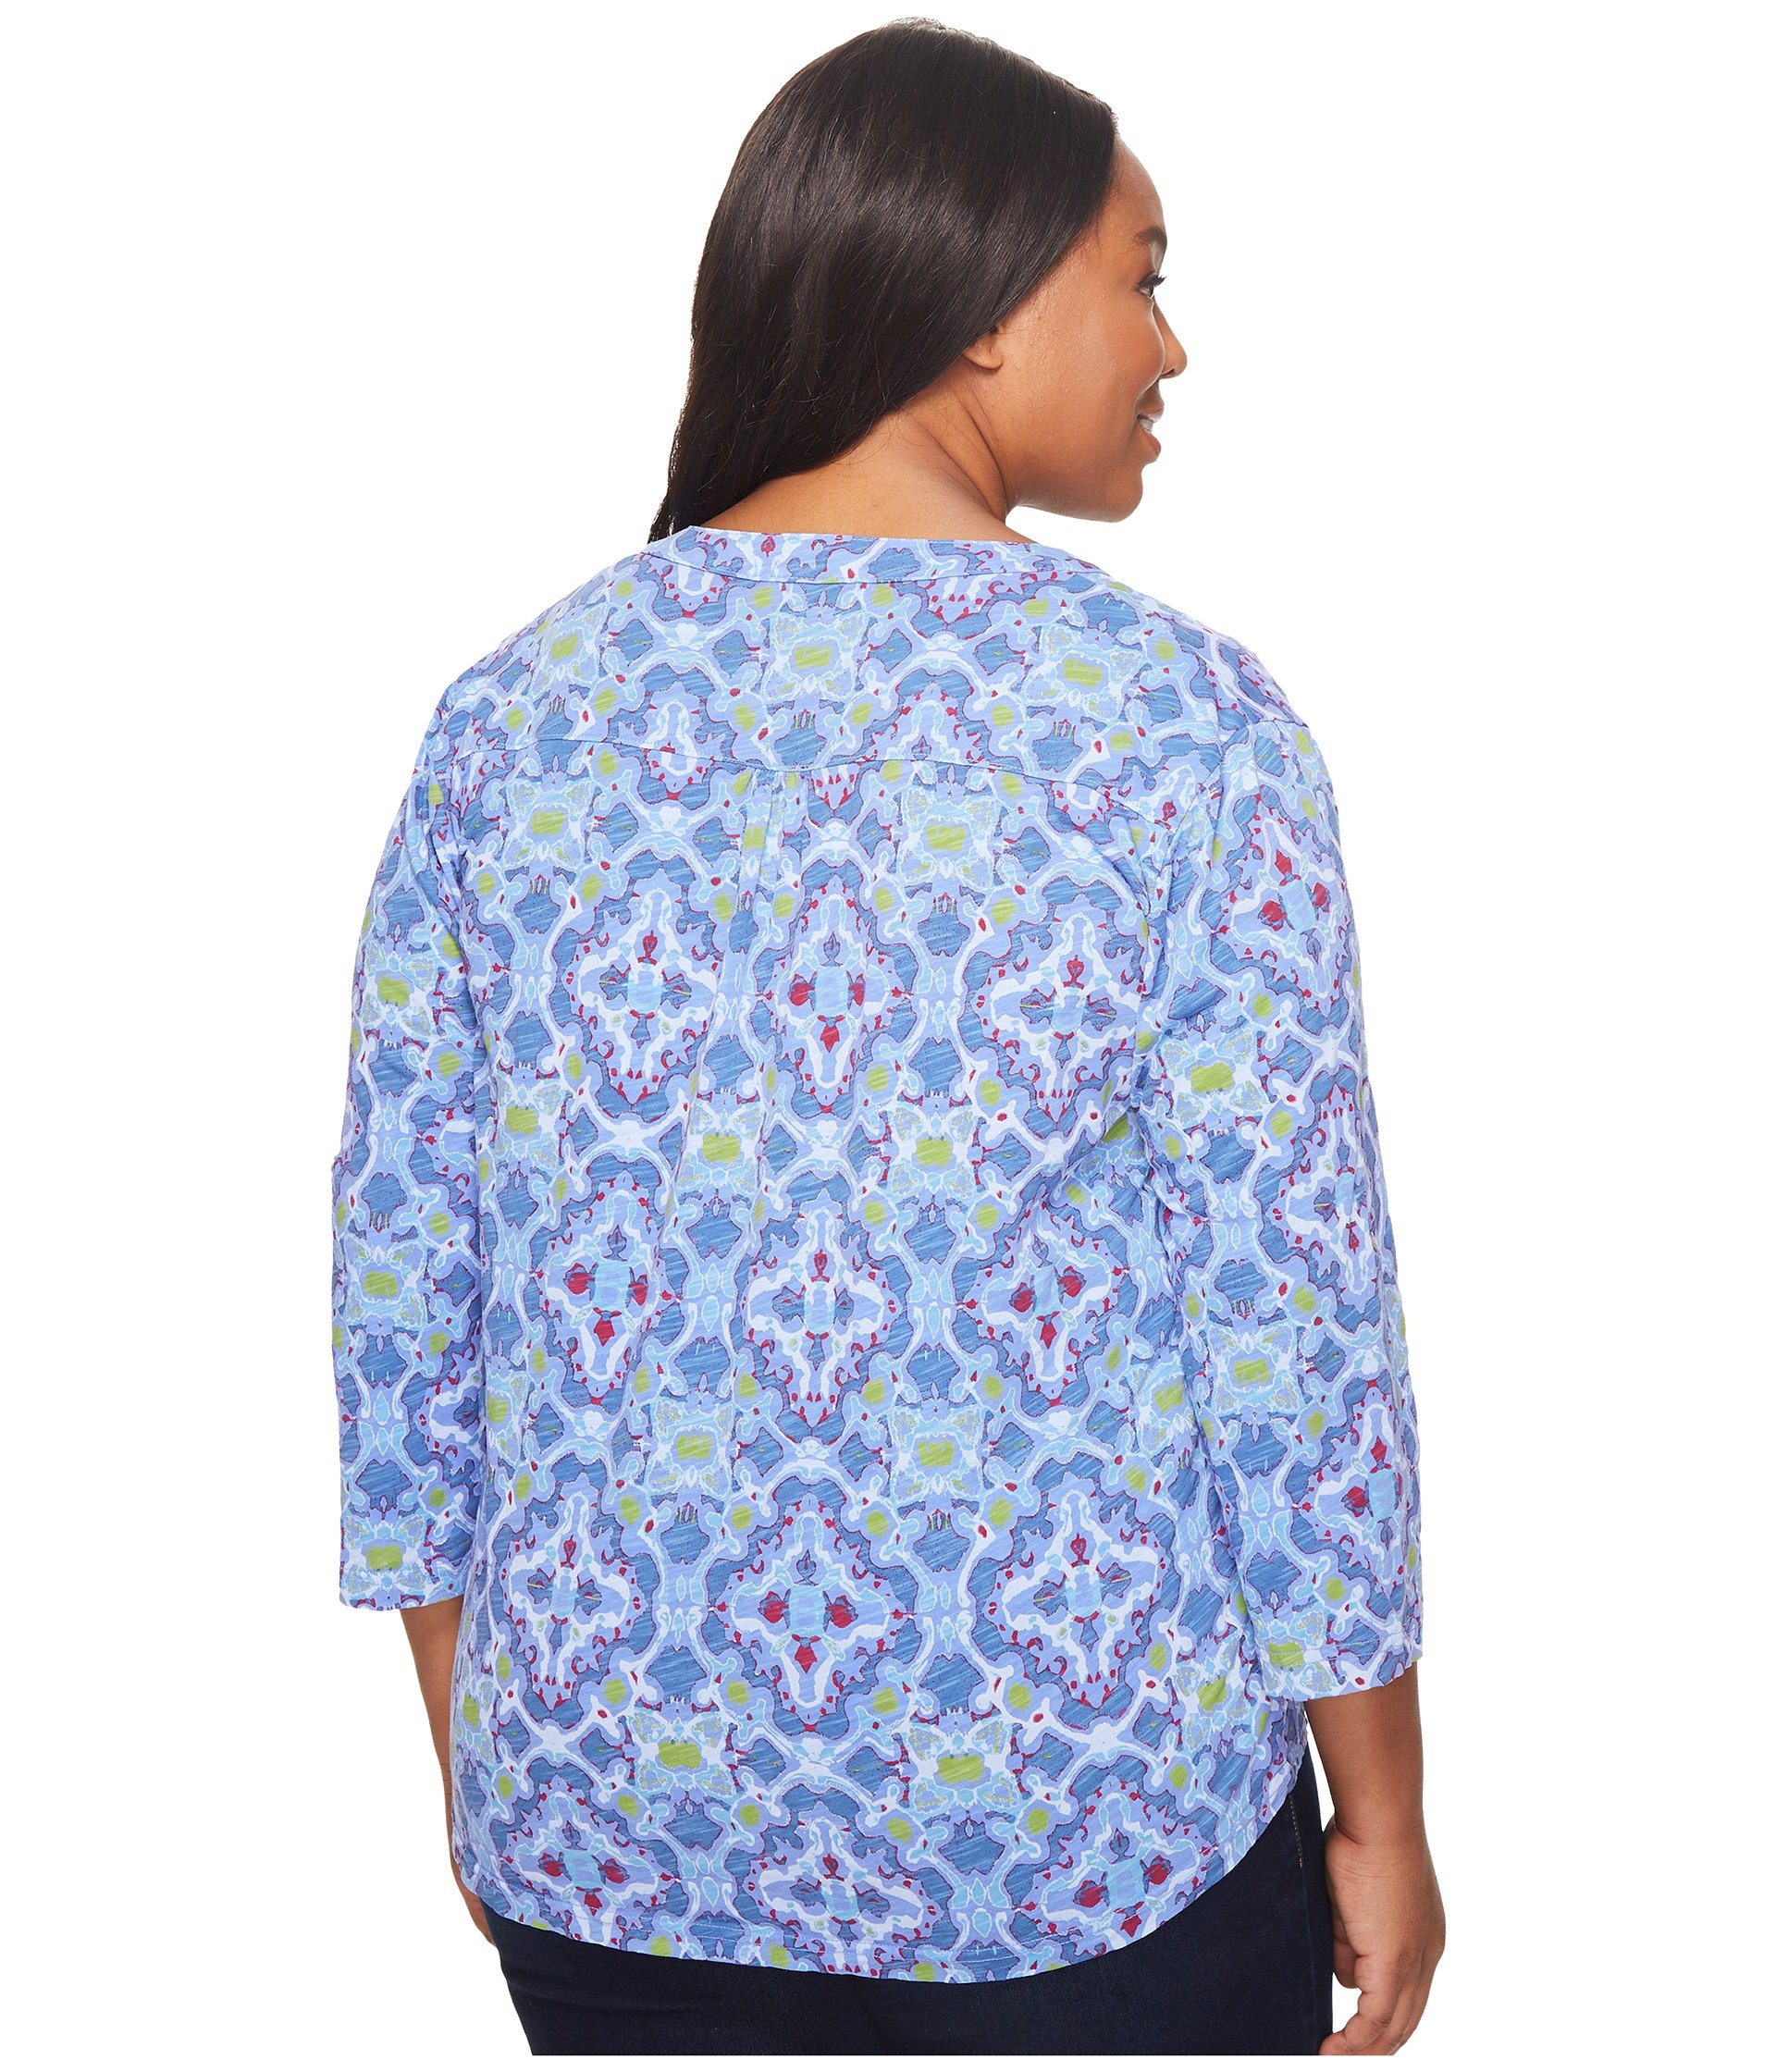 Extra Fresh by Fresh Produce Women's Clothing Plus Size Tile Play ...